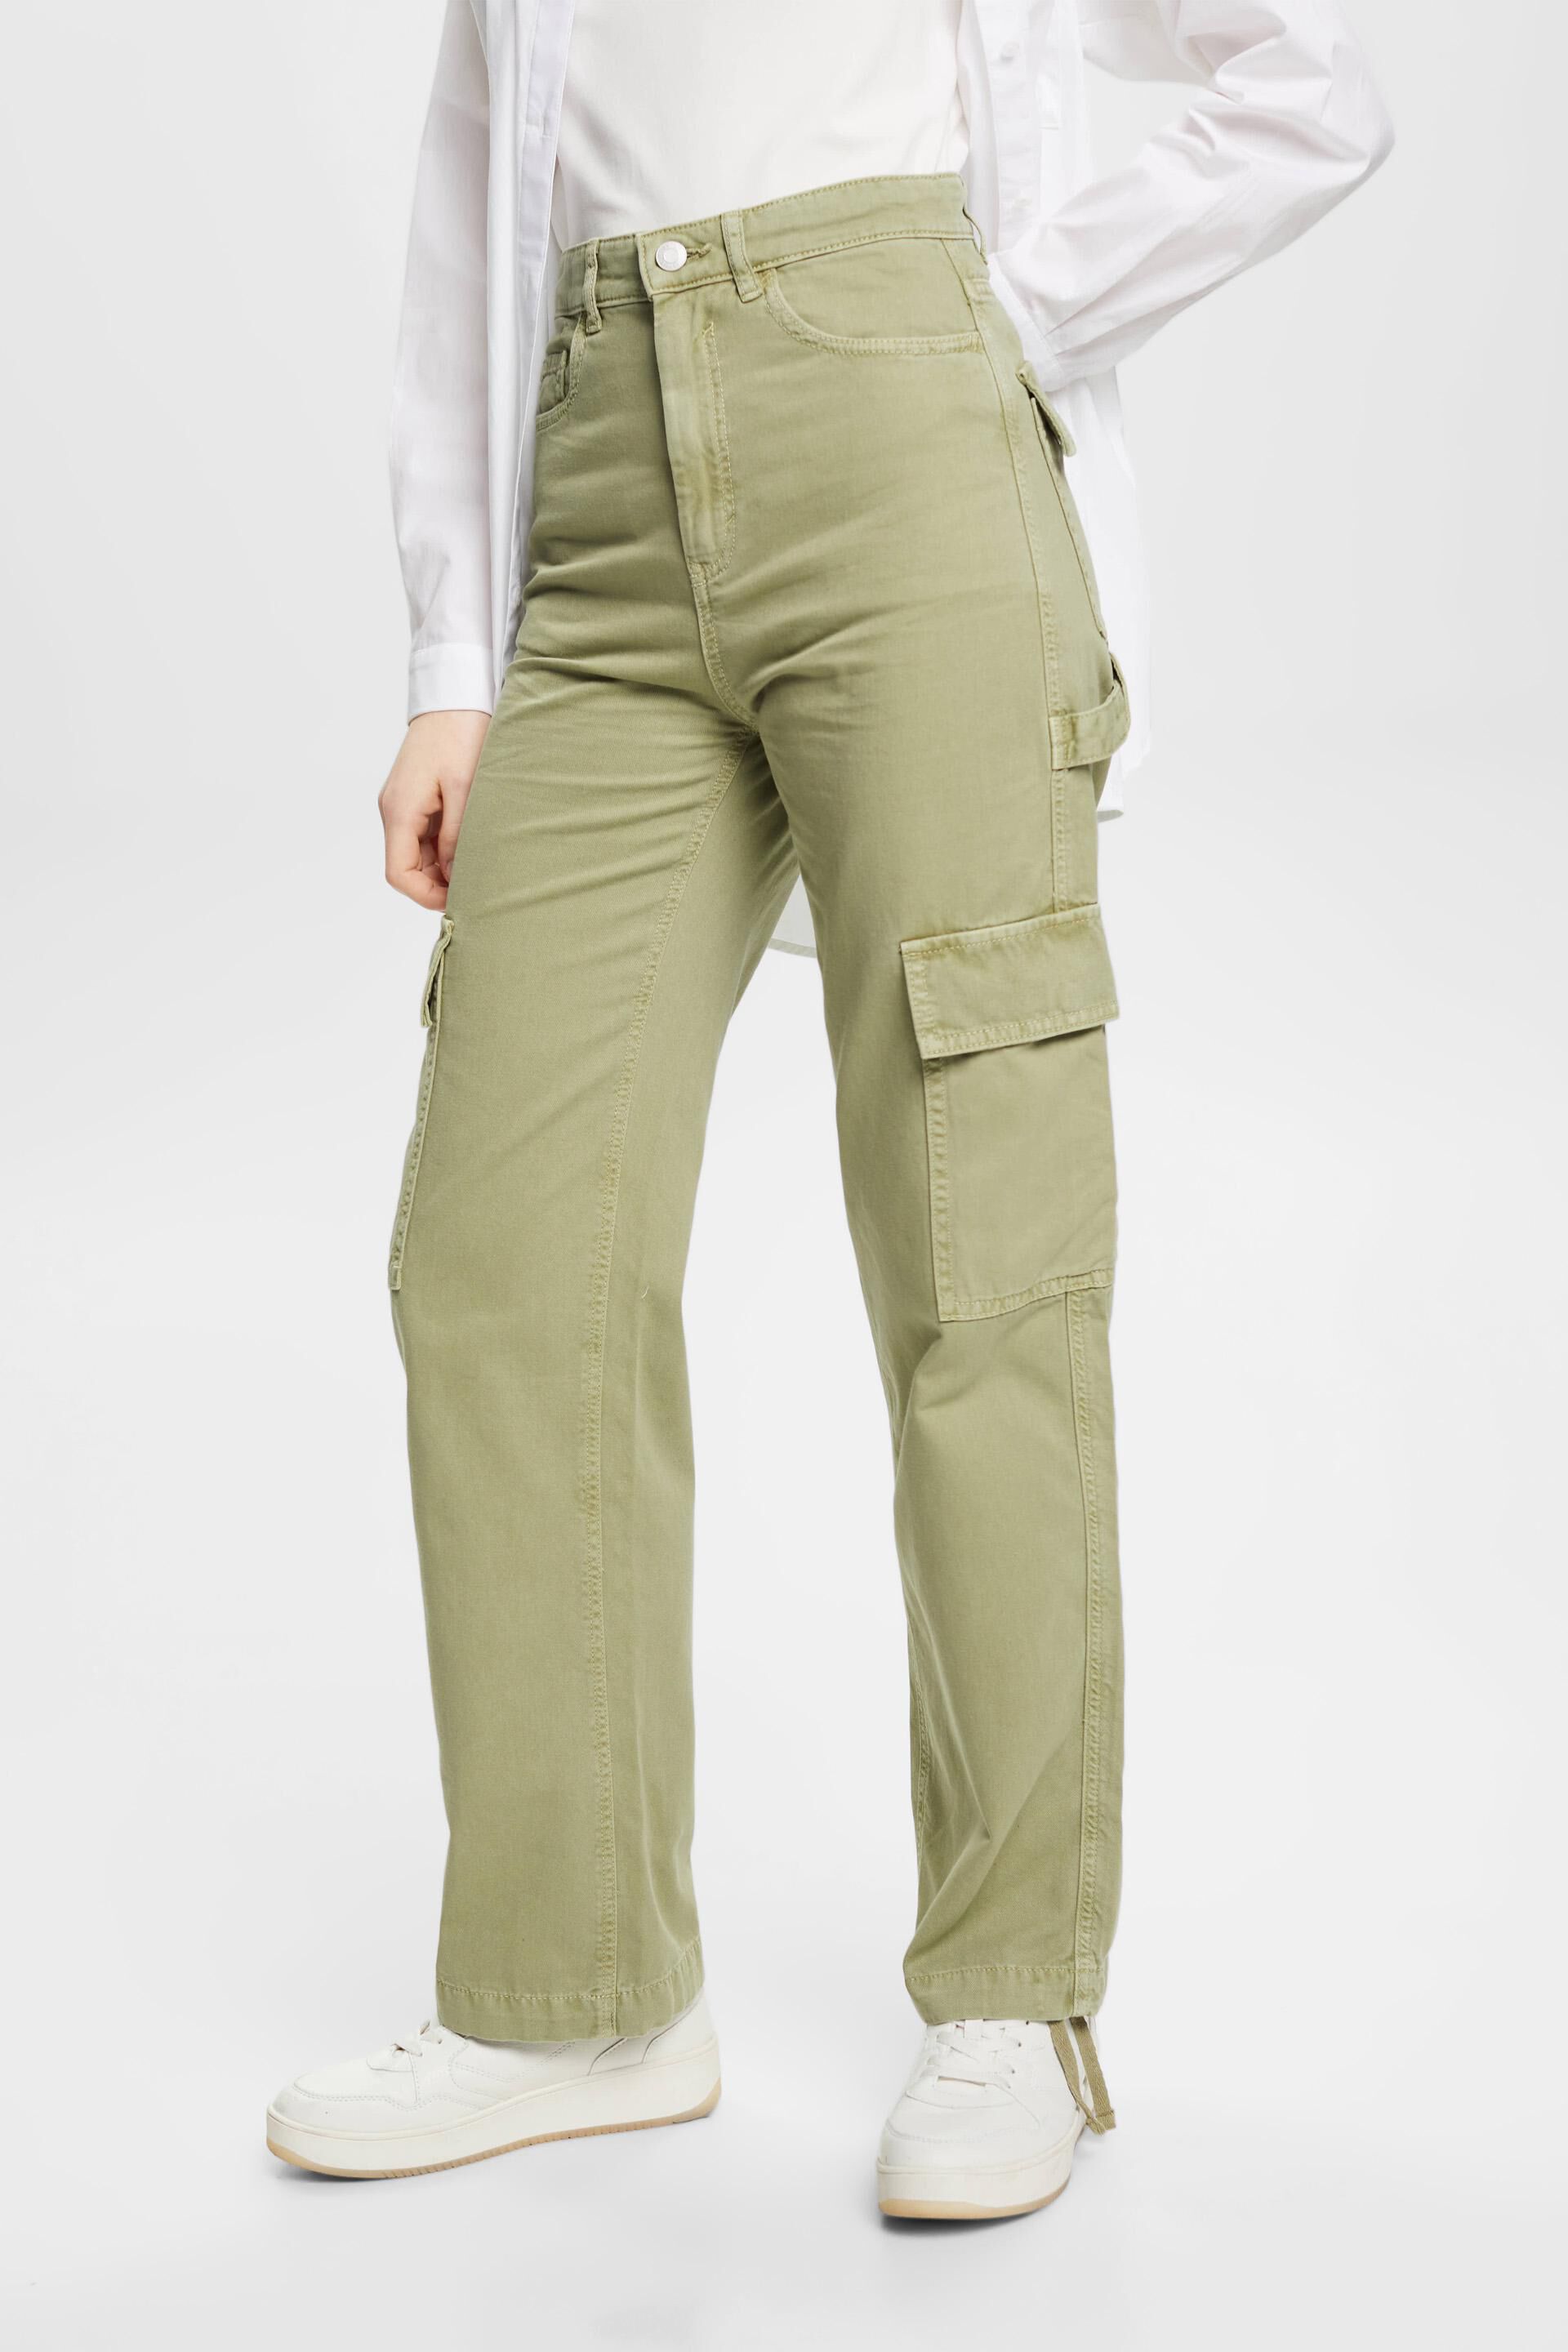 KHAKI & BLUE Women's Work Pants – Mid Rise Relaxed Fit Straight Leg Cargo  Casual Trousers with Multi Pockets 79359JTW098CA Olive 2 at Amazon Women's  Clothing store